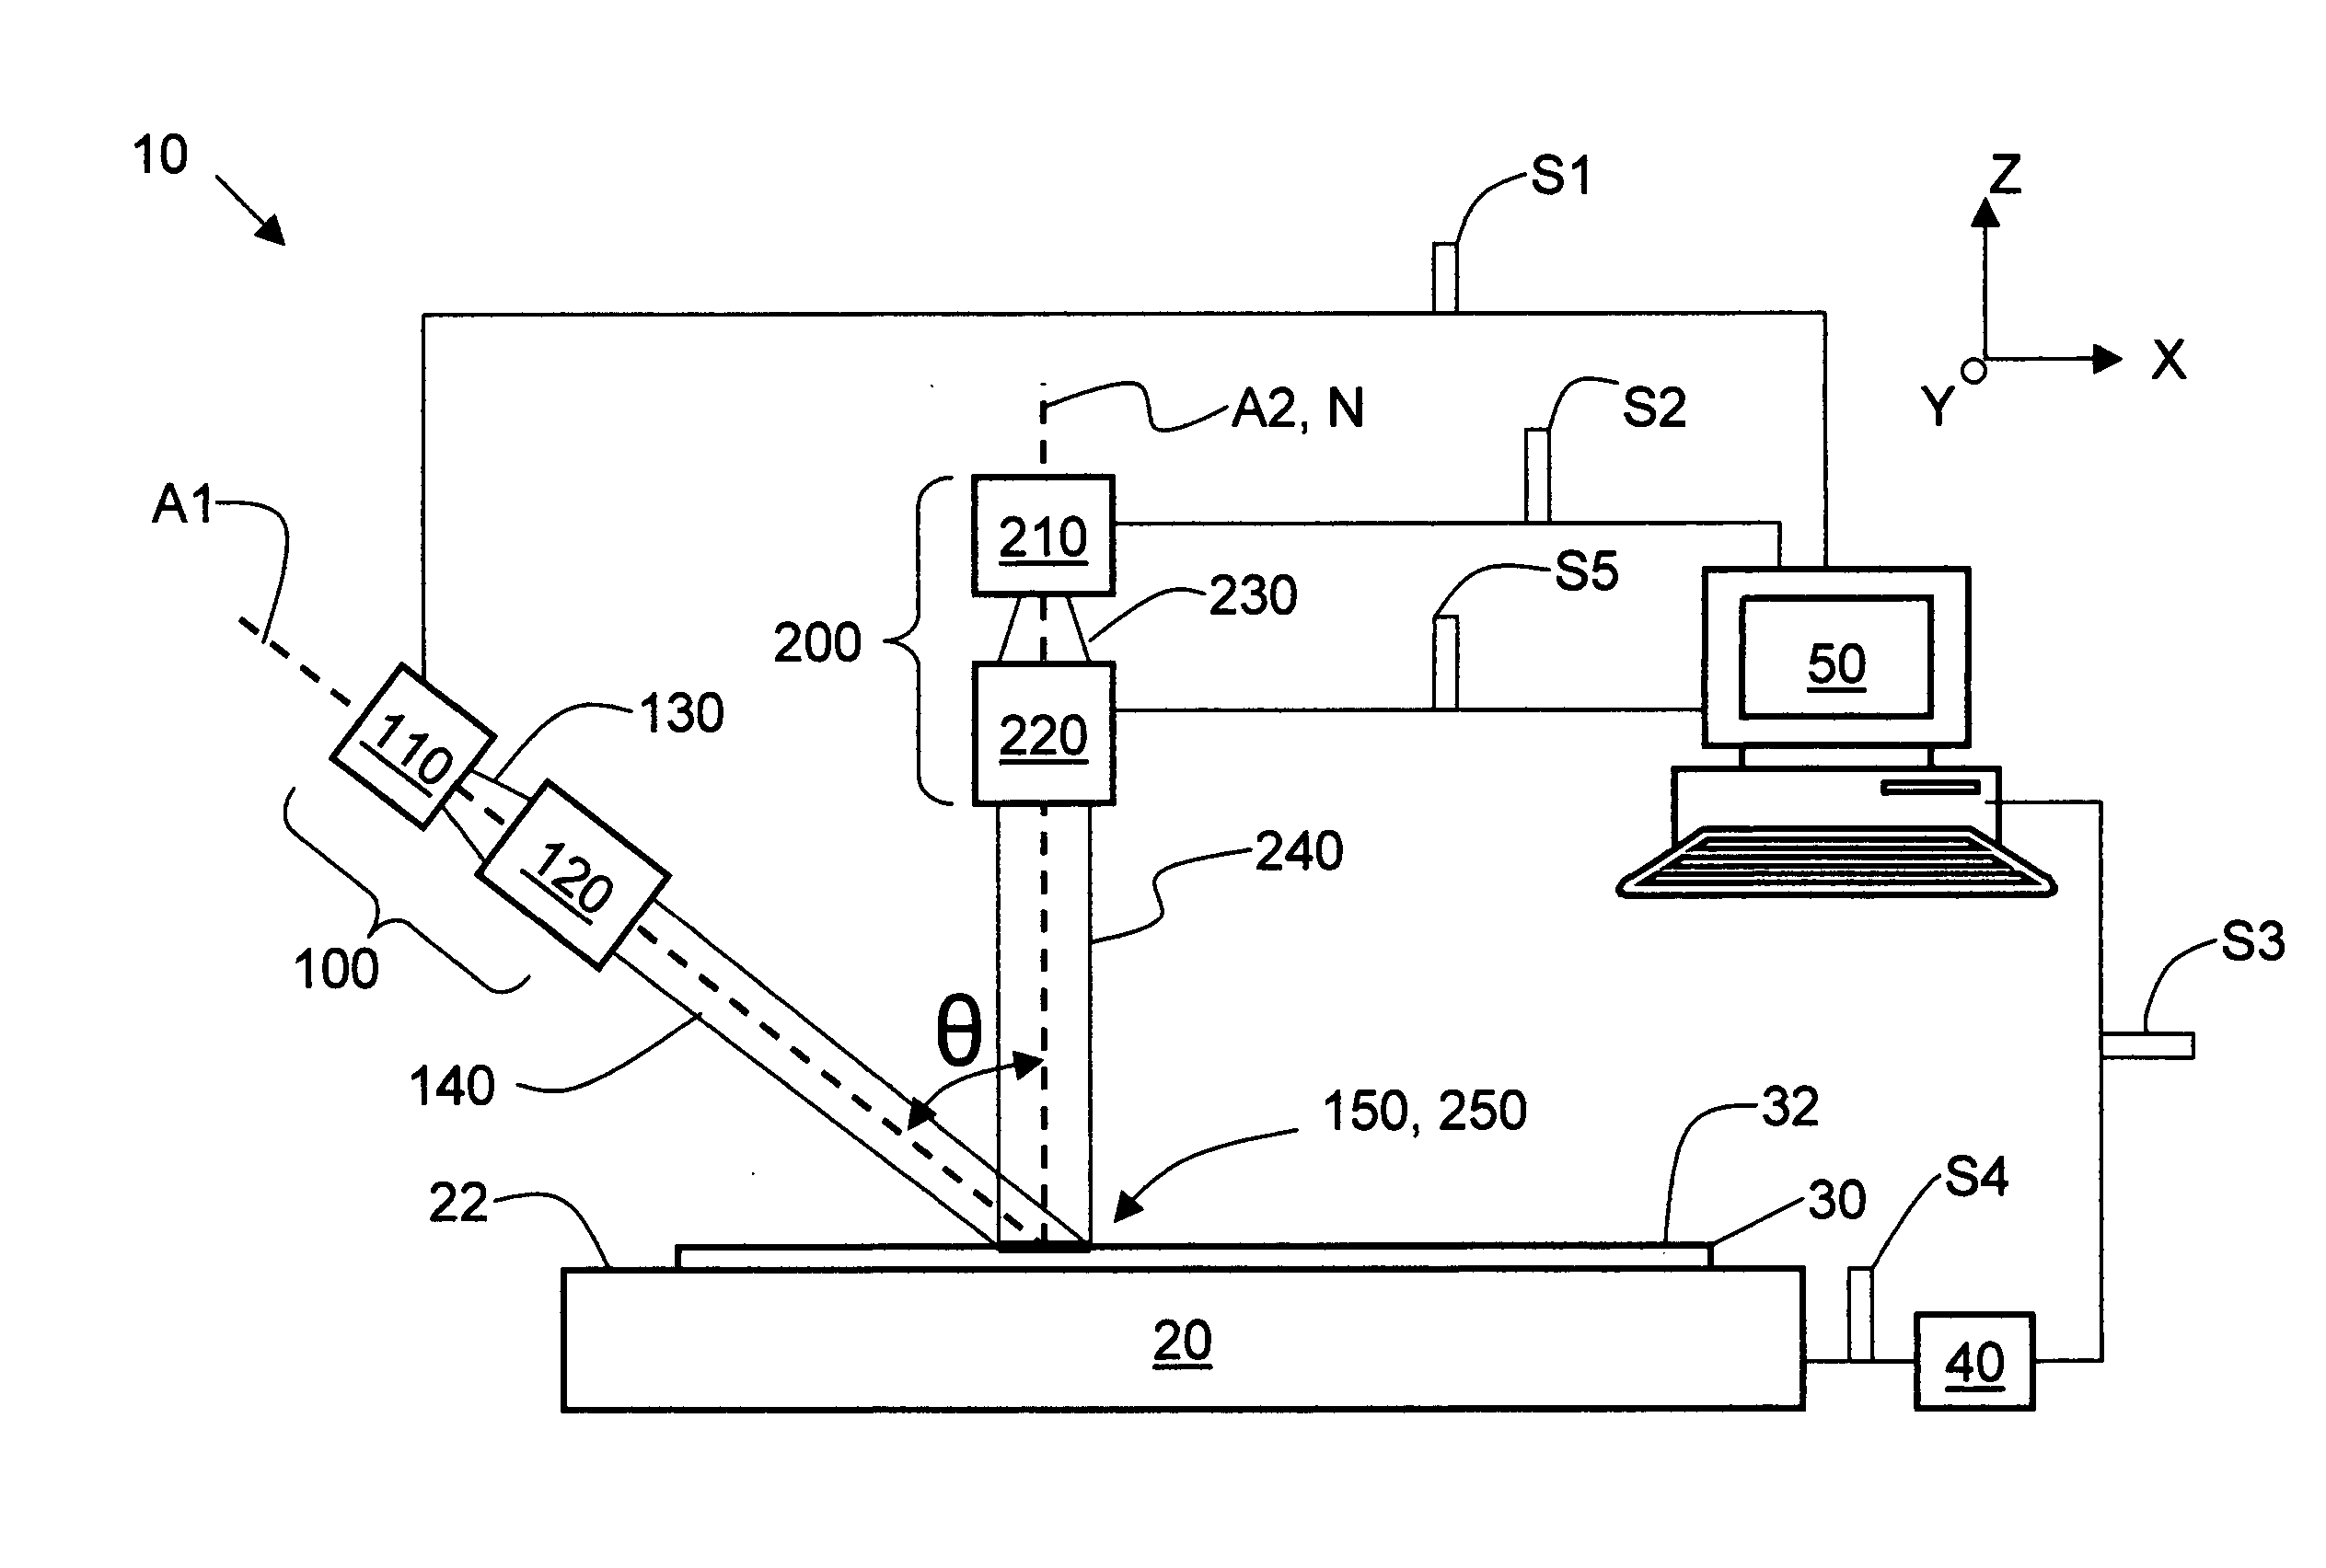 Apparatus and methods for thermally processing undoped and lightly doped substrates without pre-heating